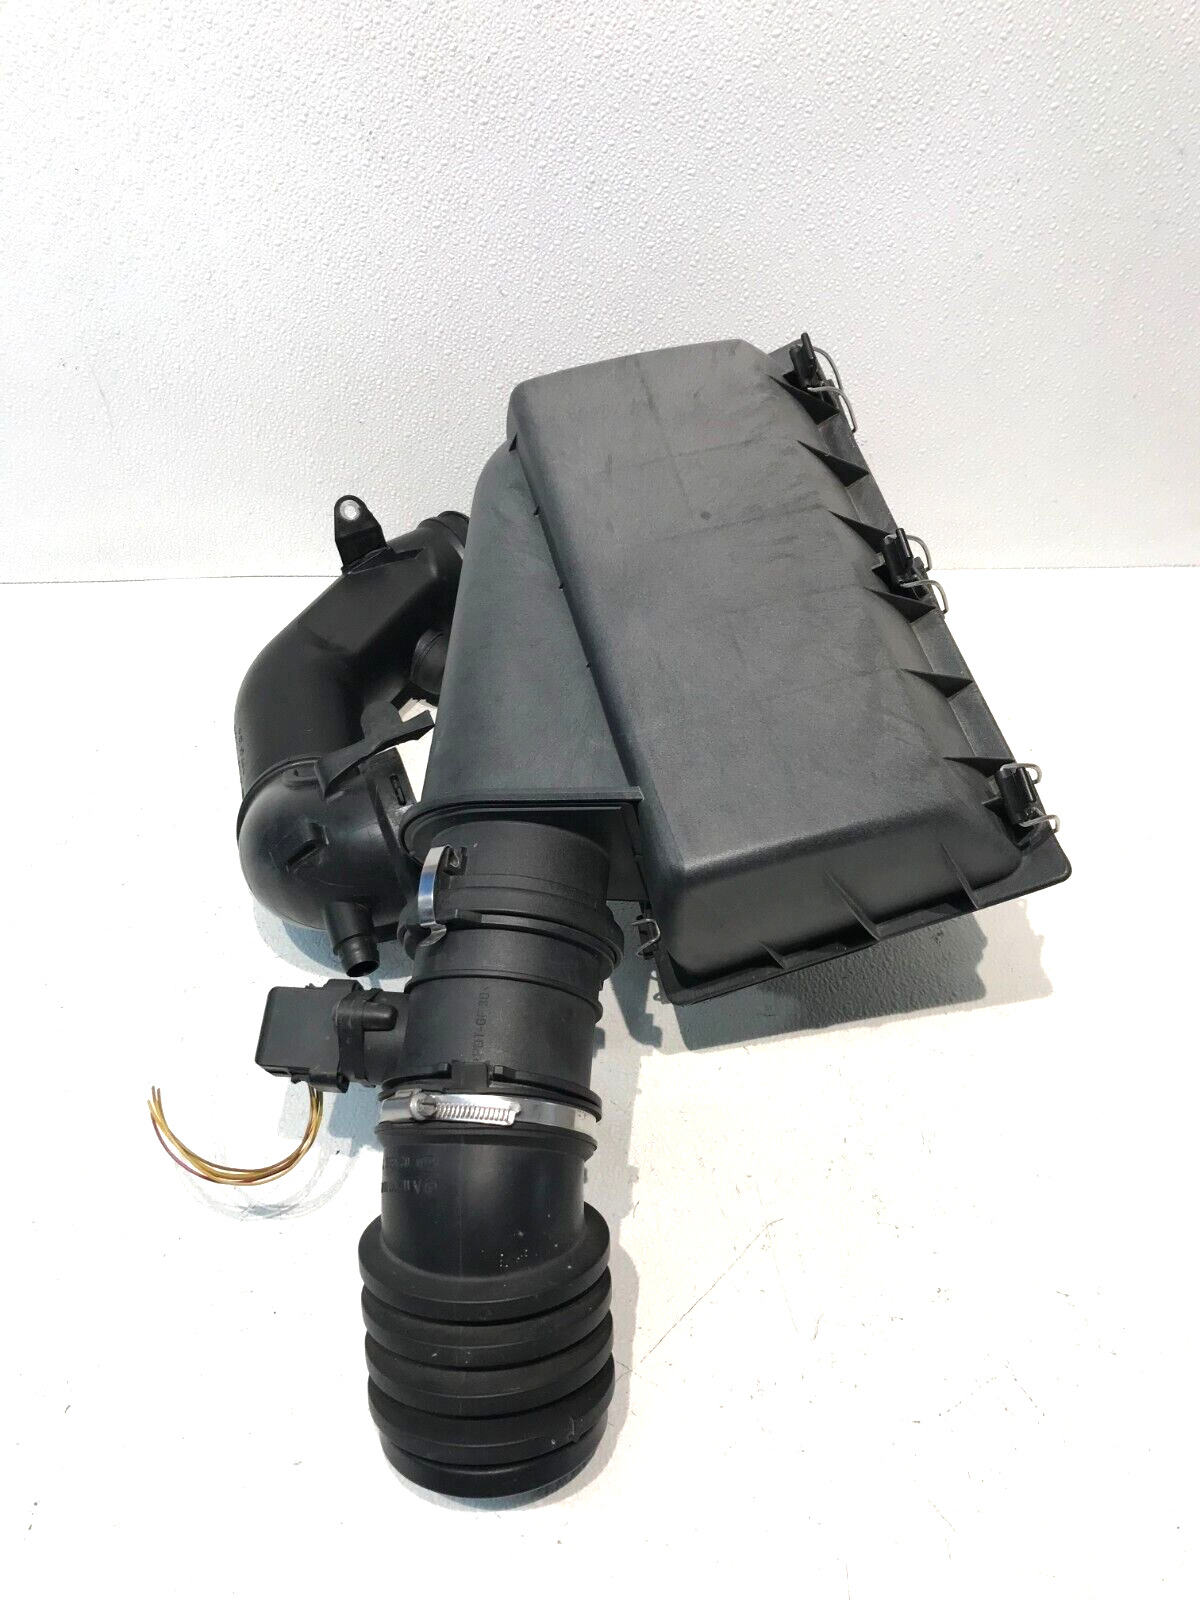 98-99 Mercedes W210 E430 E320 Air Intake Cleaner Filter Housing Box Complete OEM